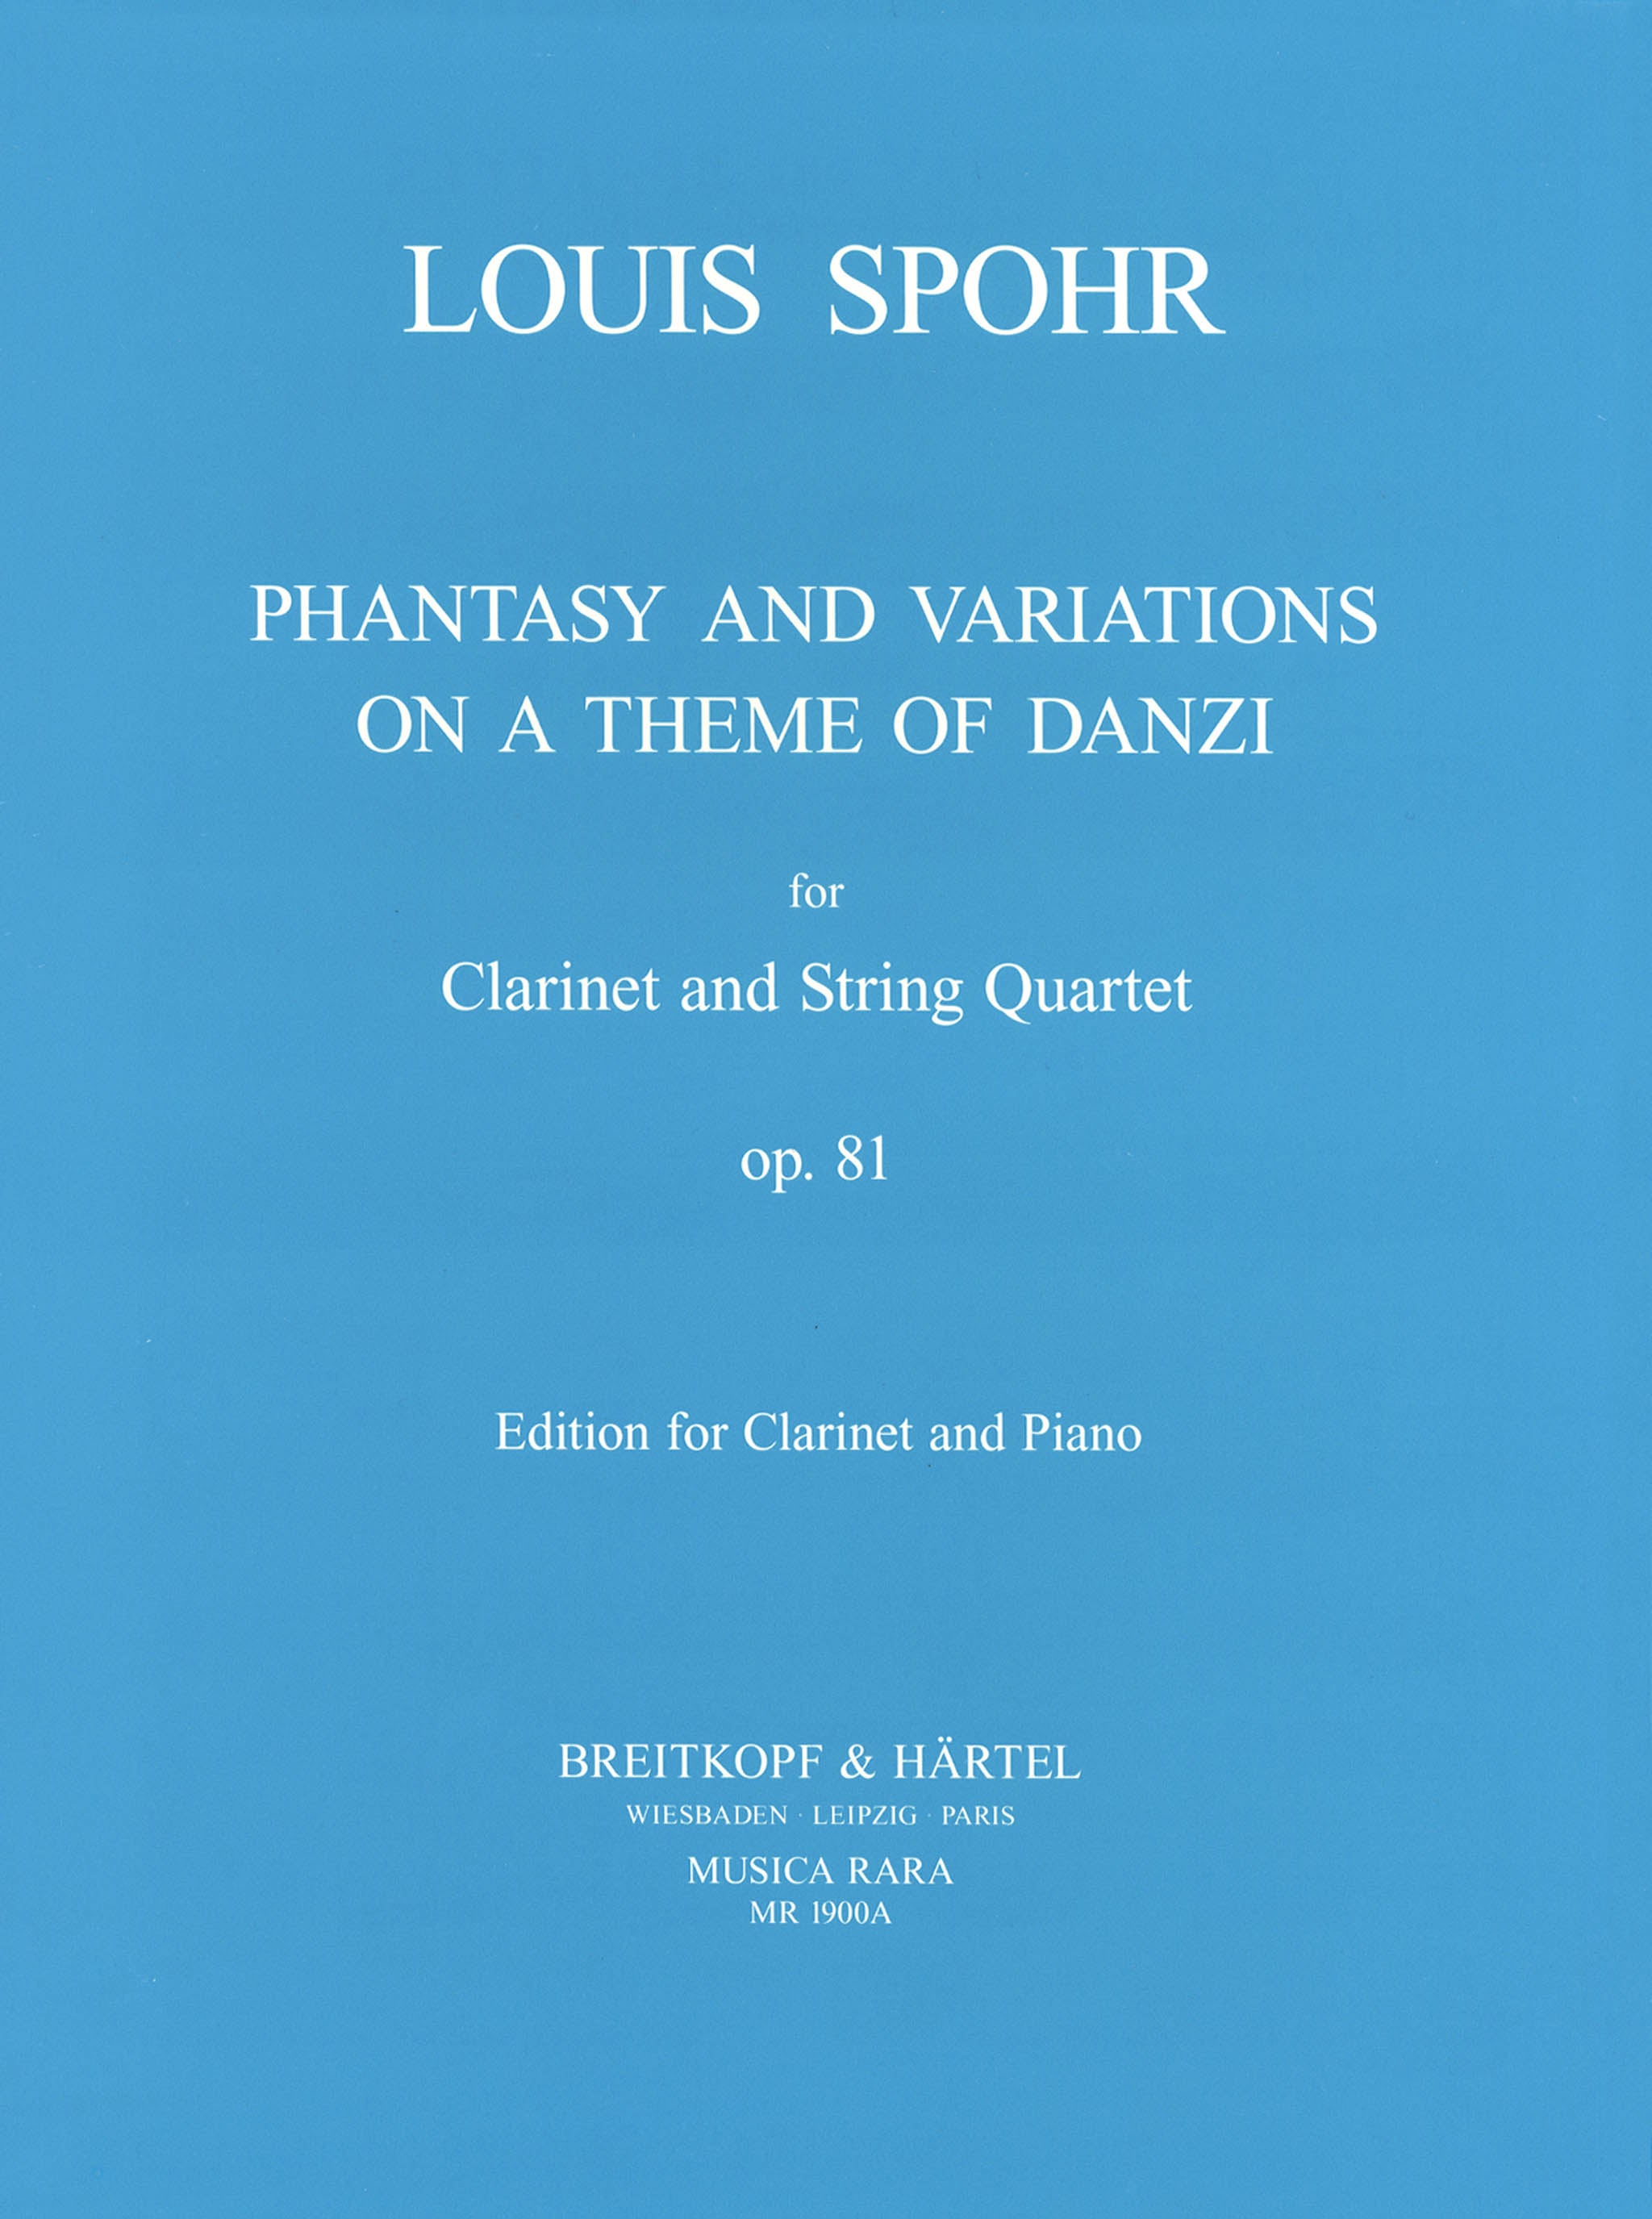 Spohr Fantaisie & Variations on Danzi Theme, Op. 81 Cover